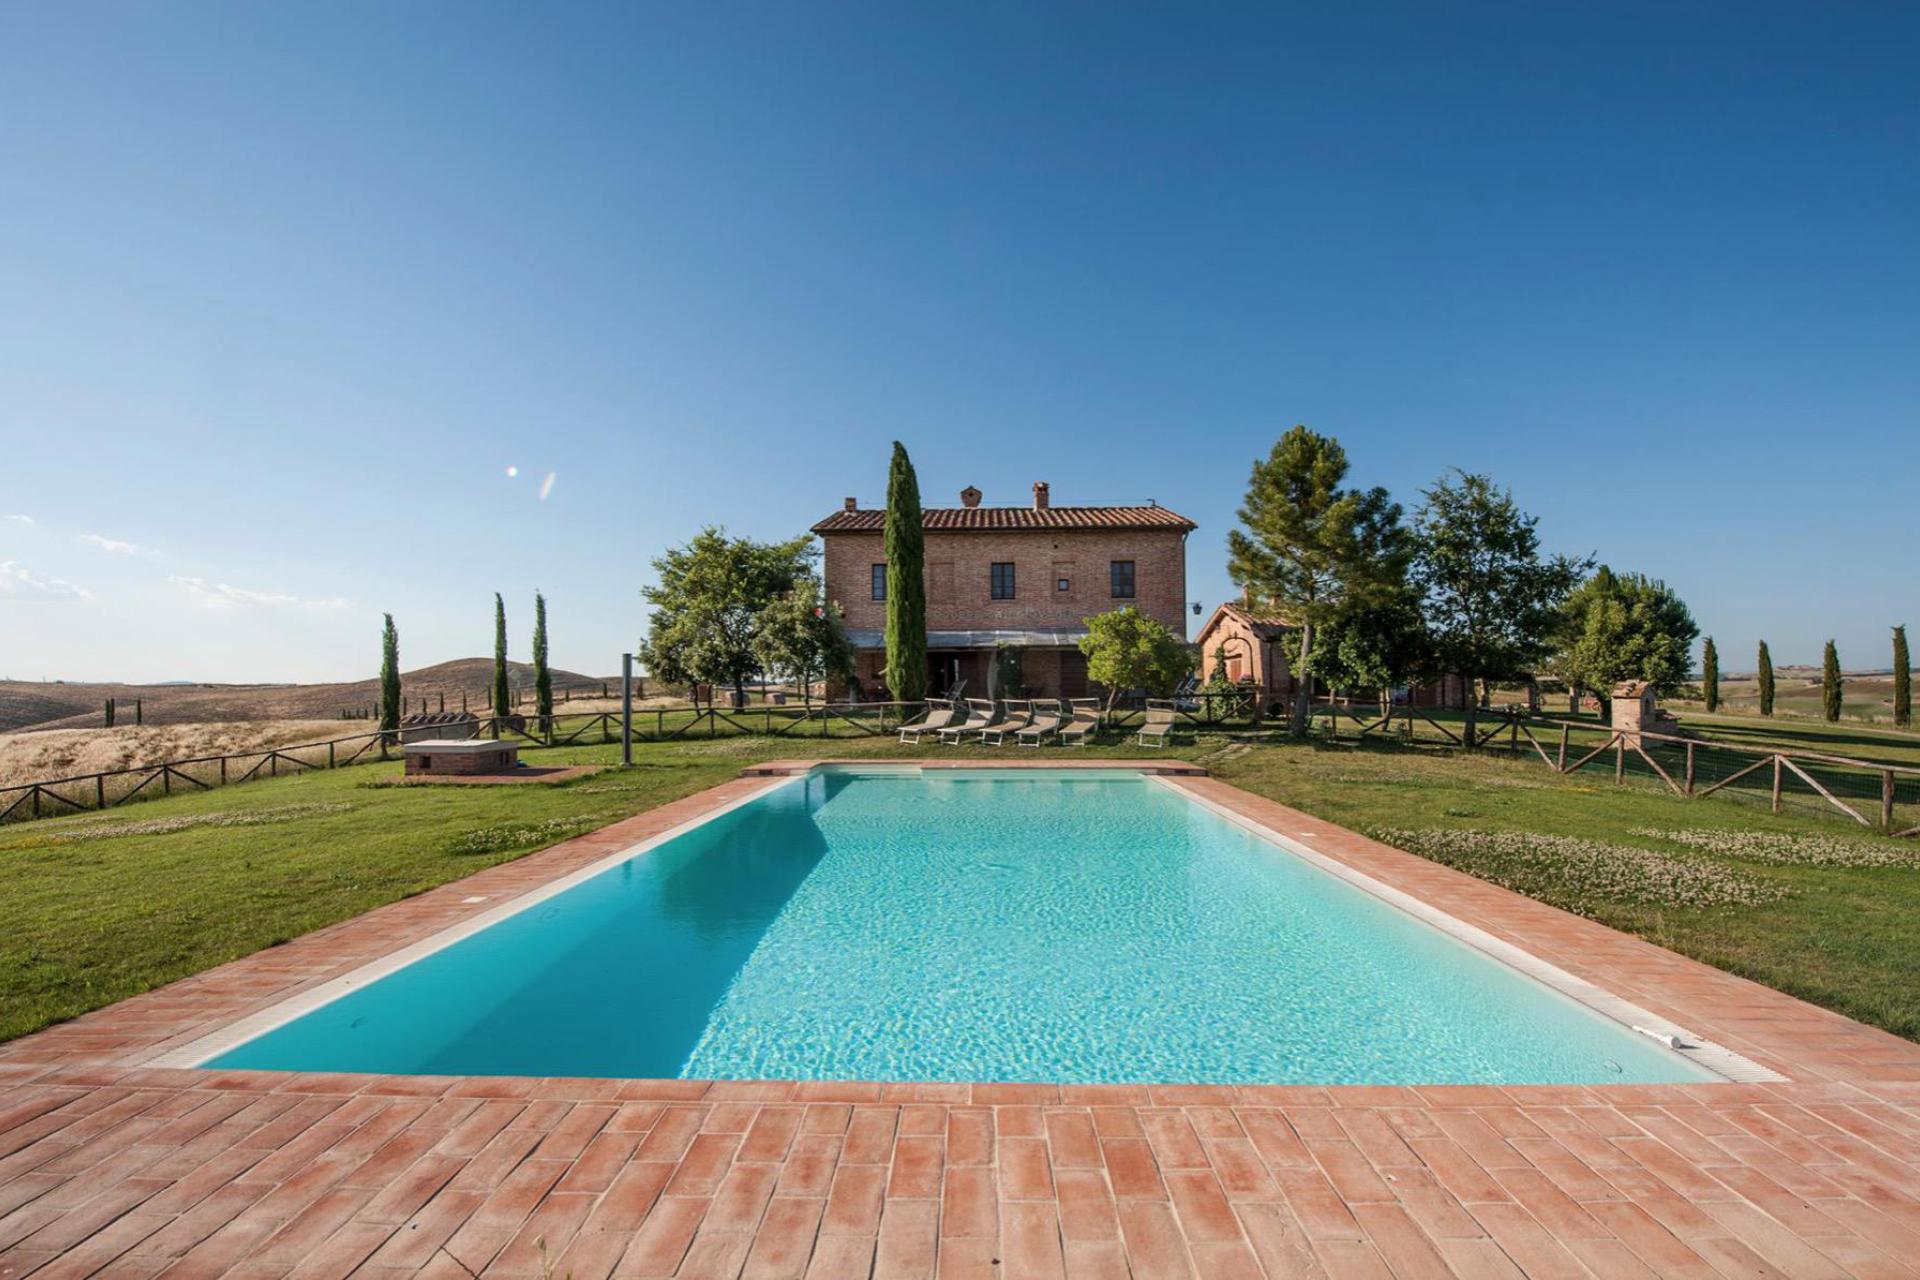 Agriturismo with great views of the Tuscan hills and Siena